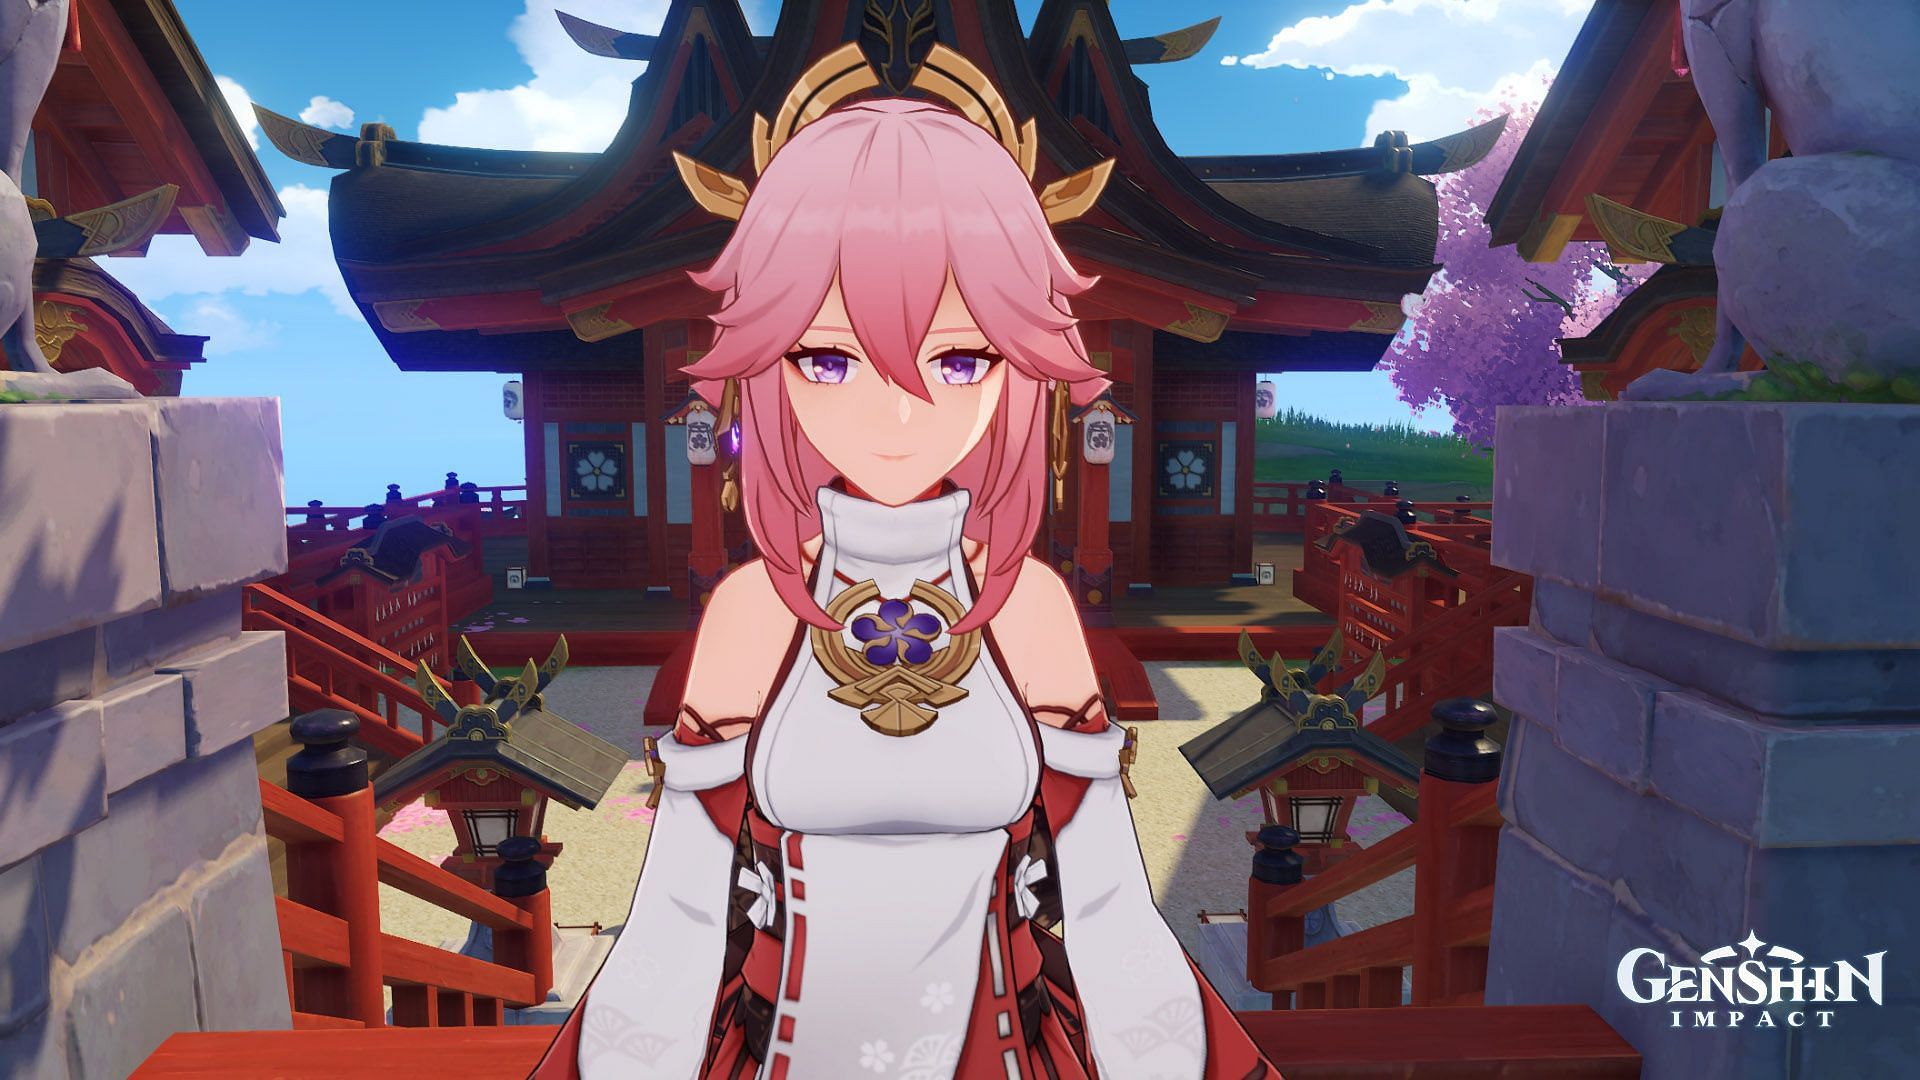 Genshin Impact 2.5 update to bring Yae Miko character, Release date leaked